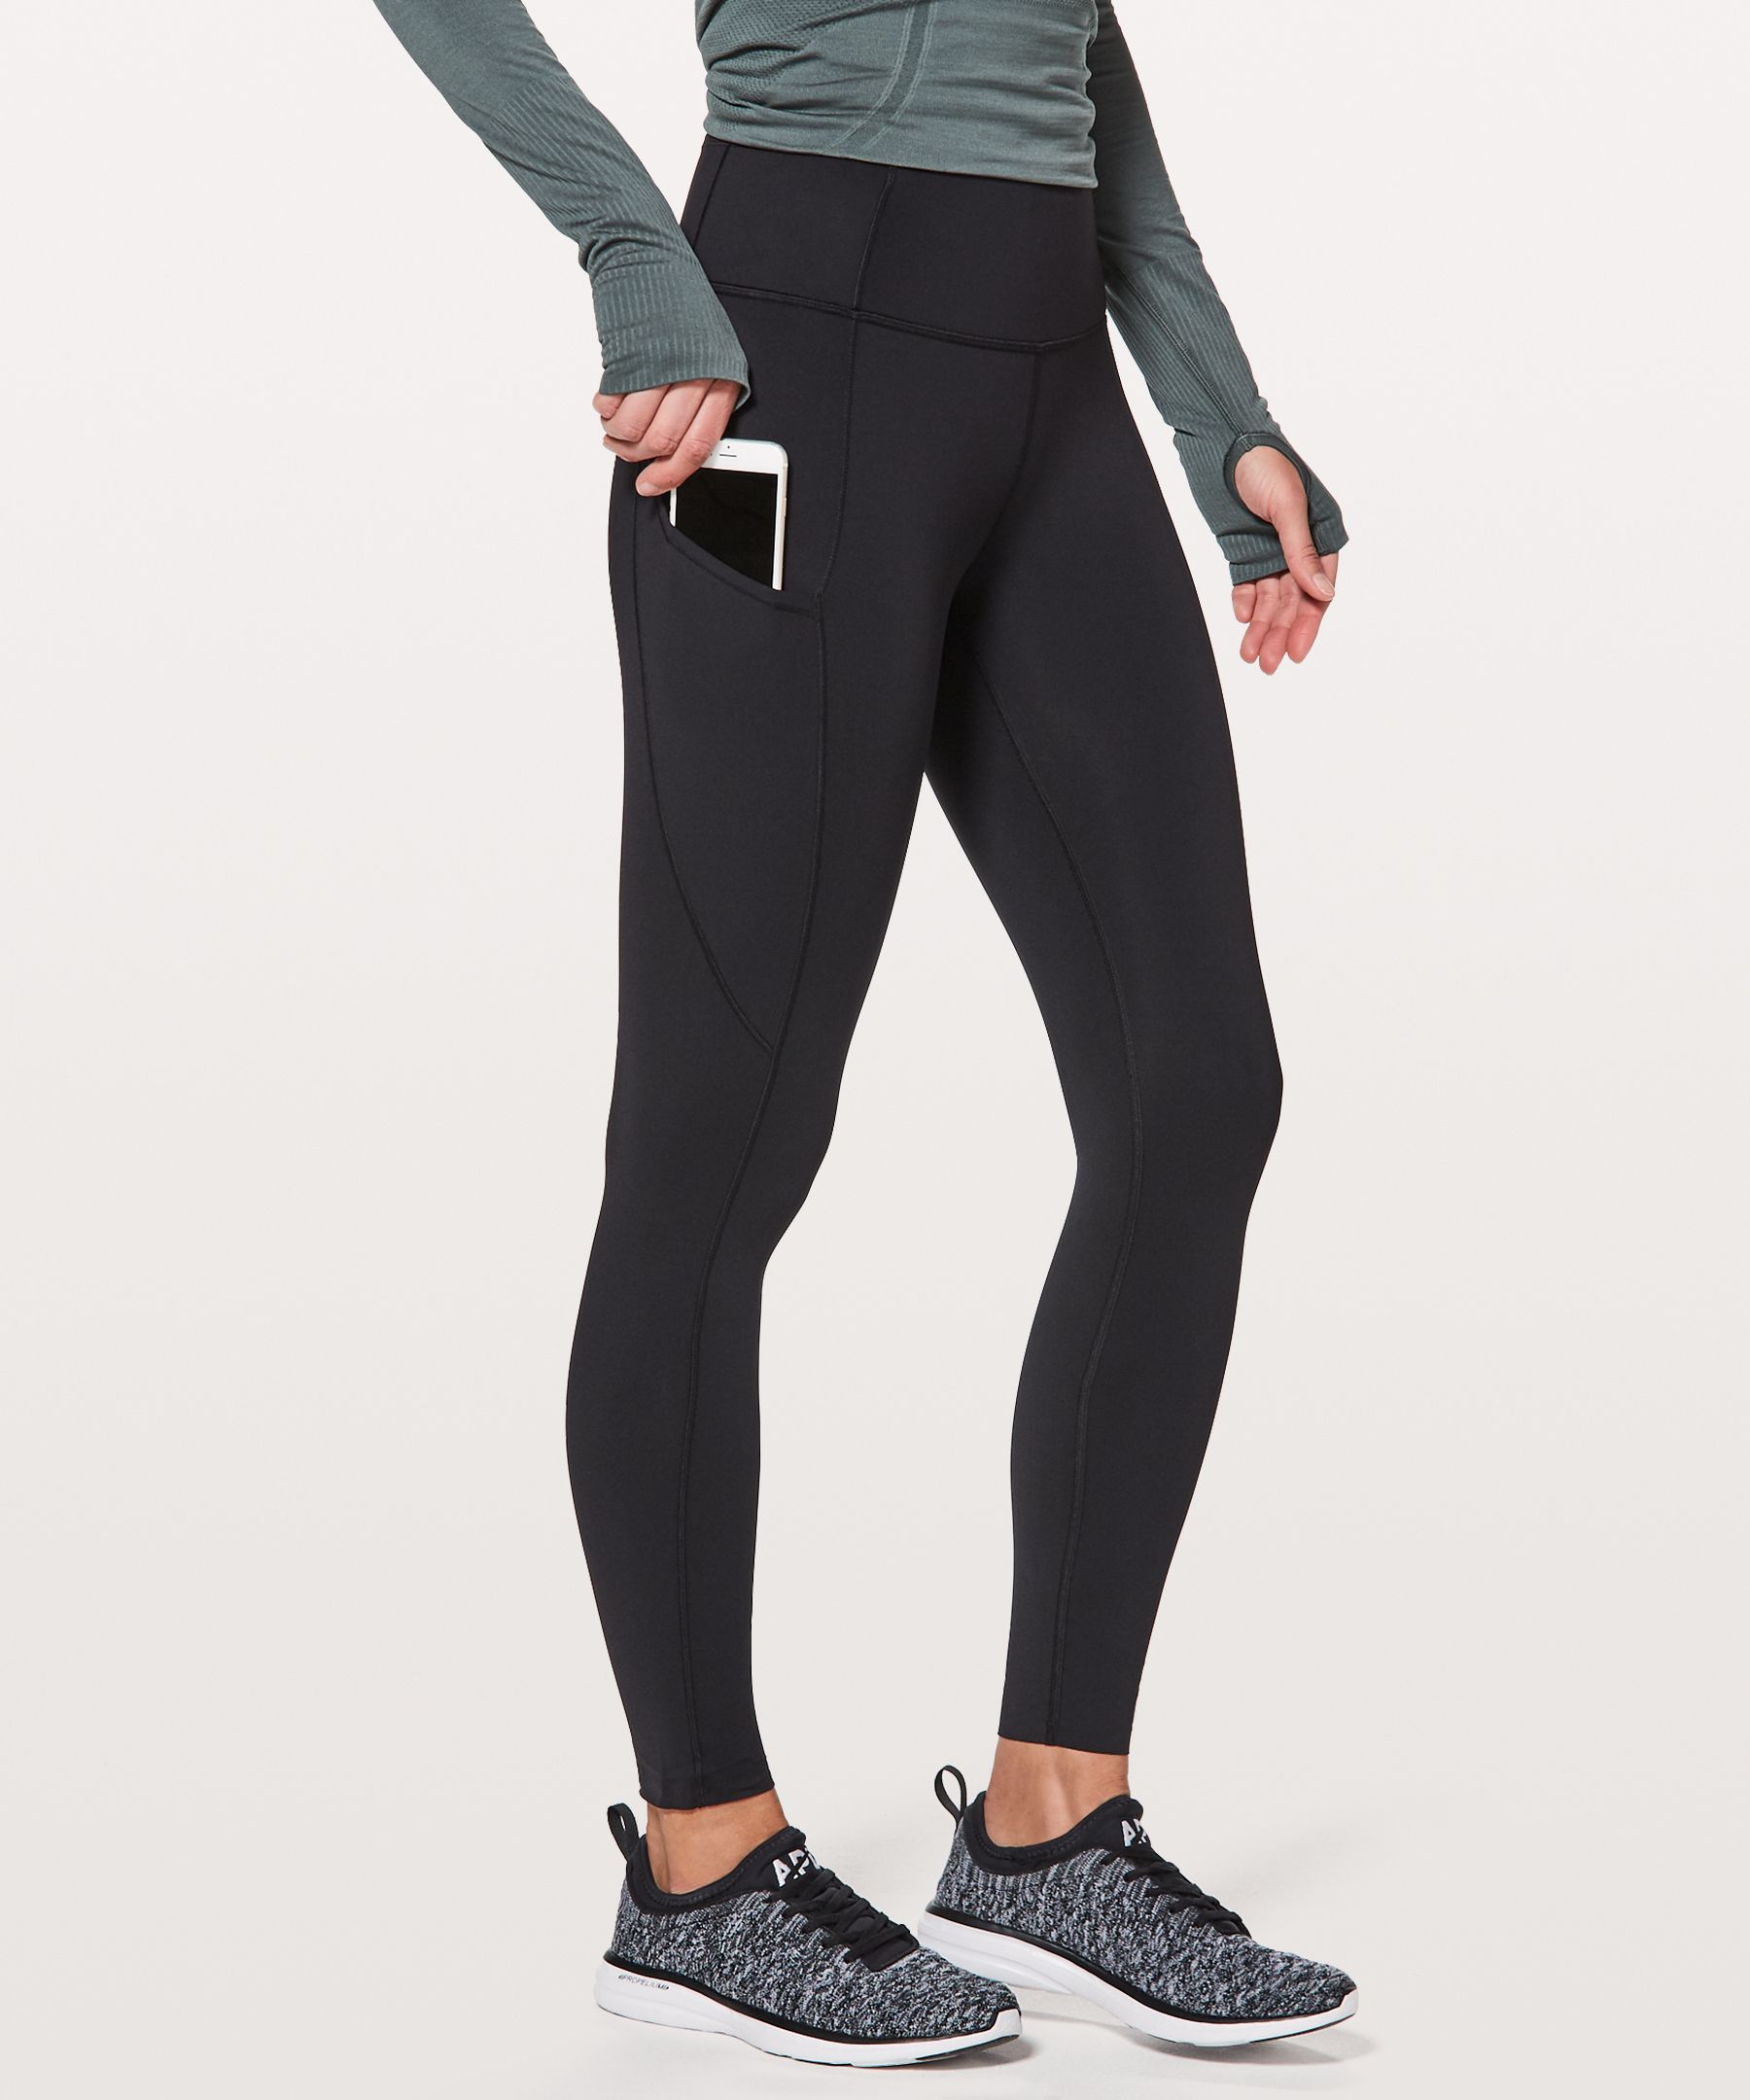 Fast and Free High-Rise Tight 25, Women's Leggings/Tights